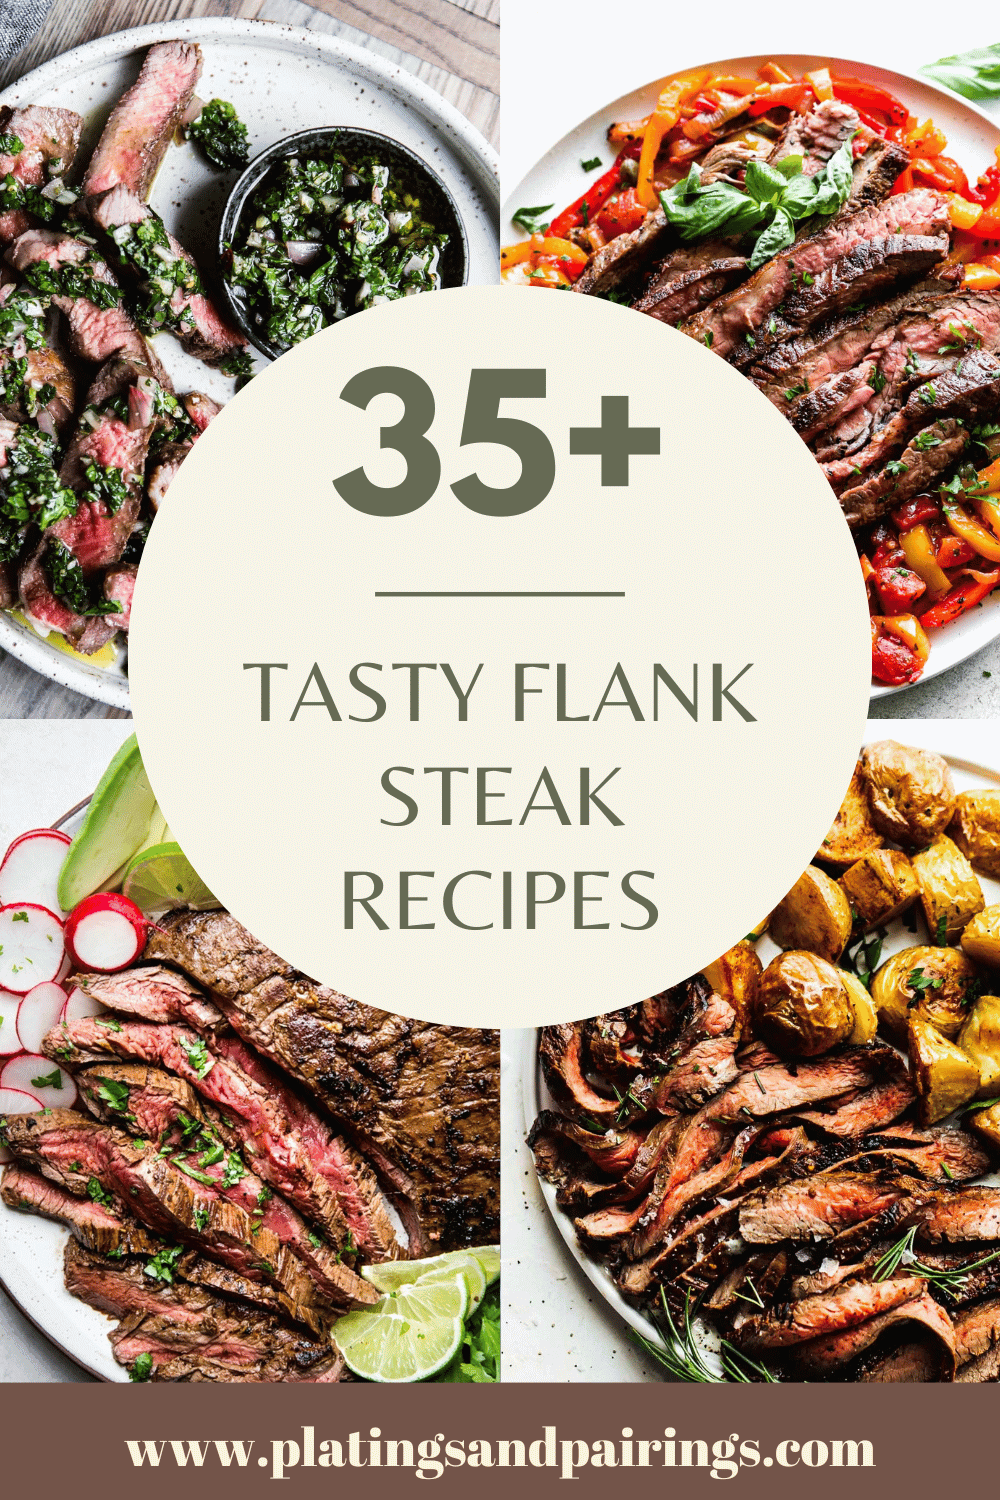 Collage of flank steak recipes with text overlay.